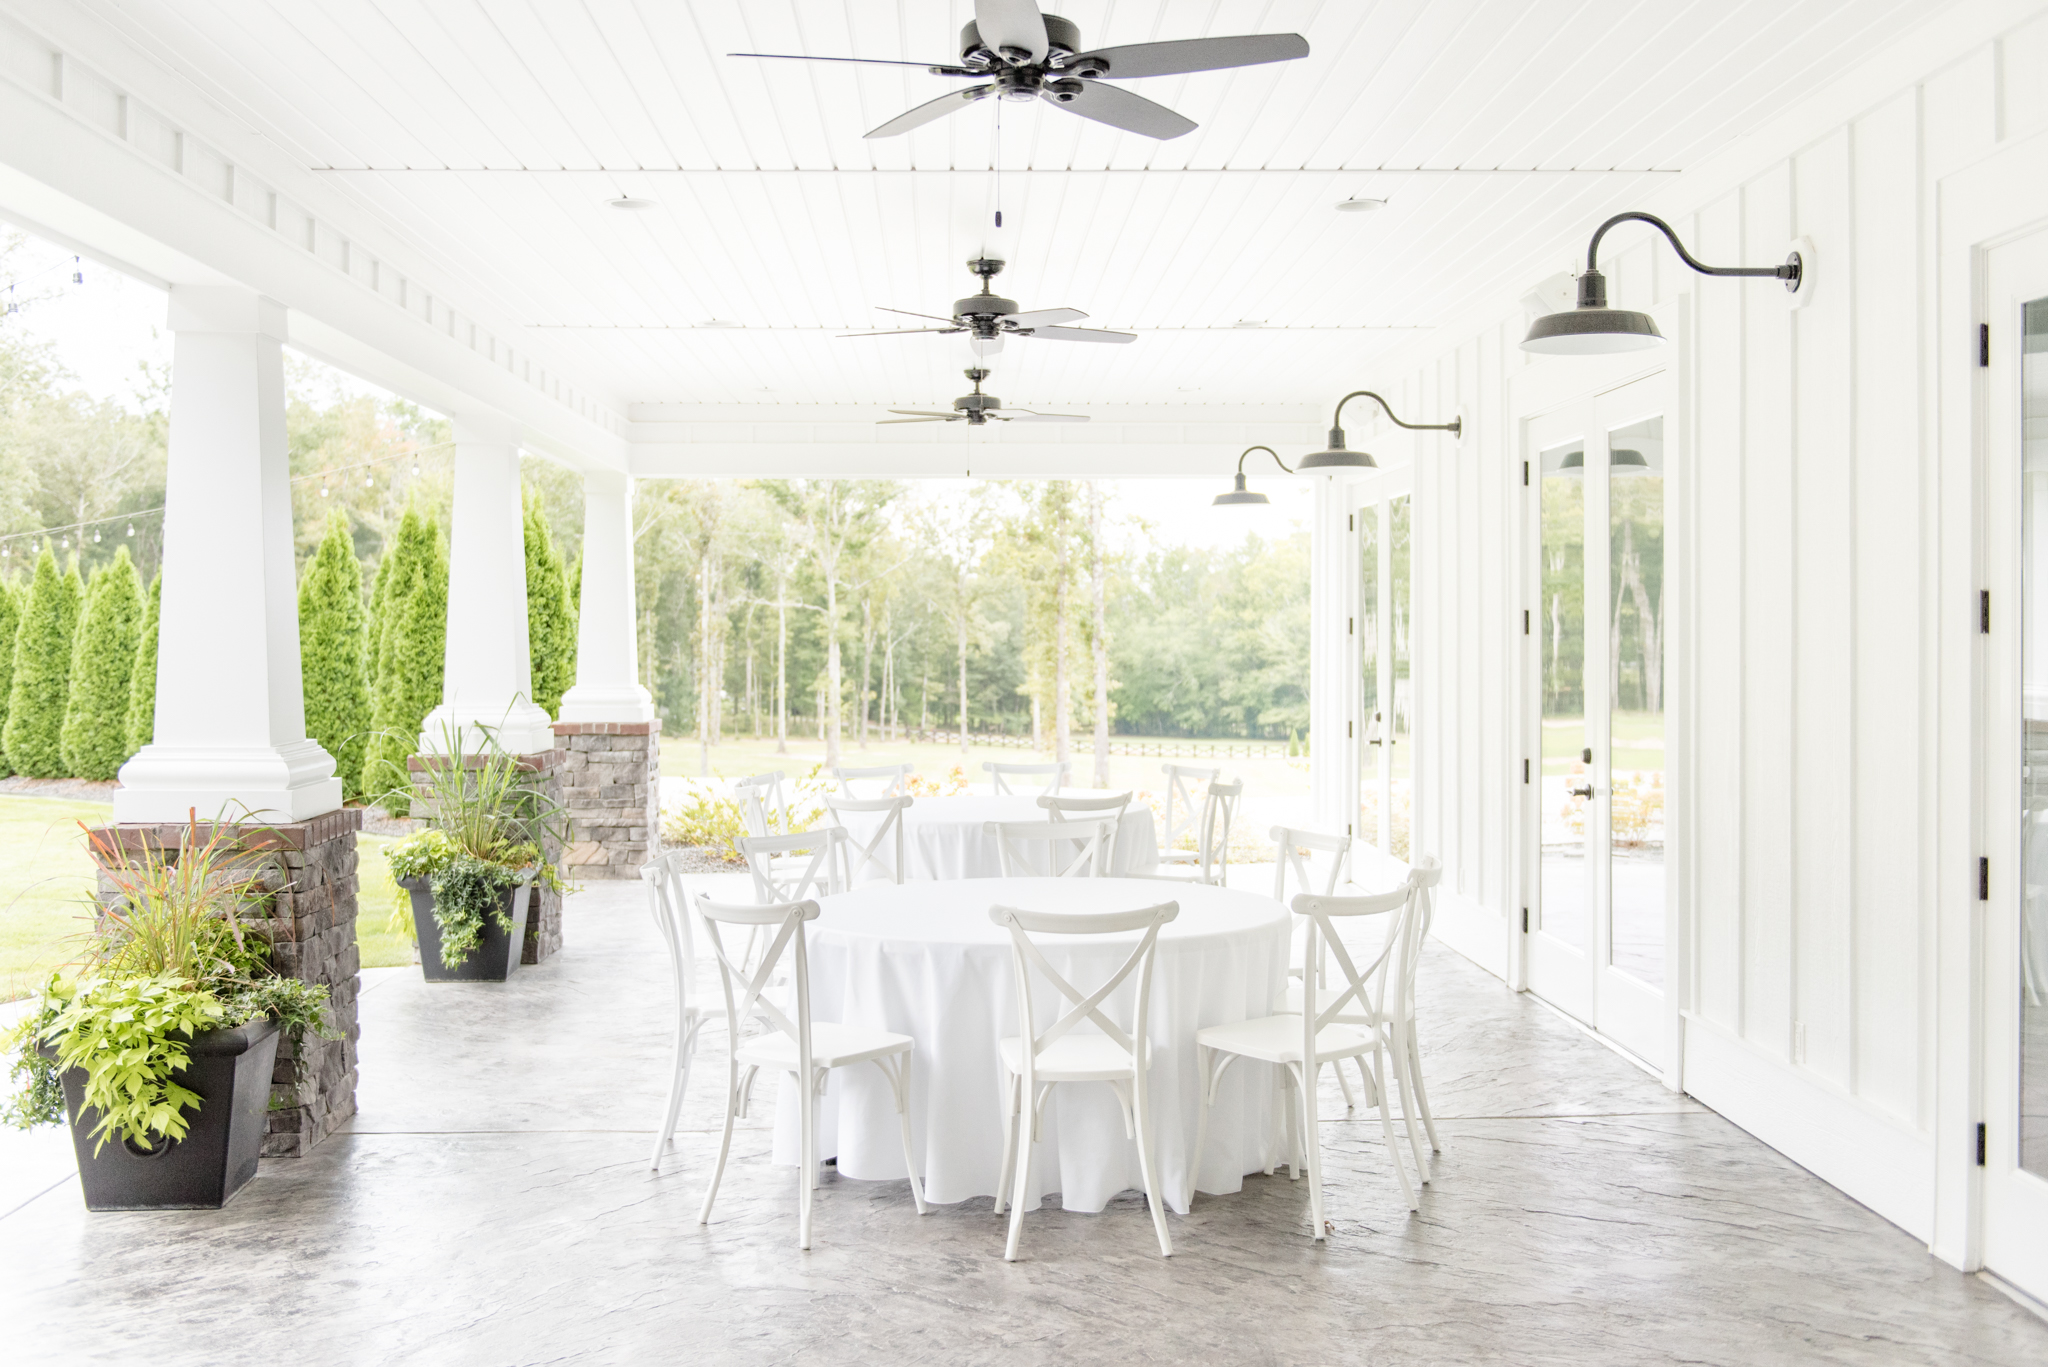 Outdoor reception space with white table and chairs.